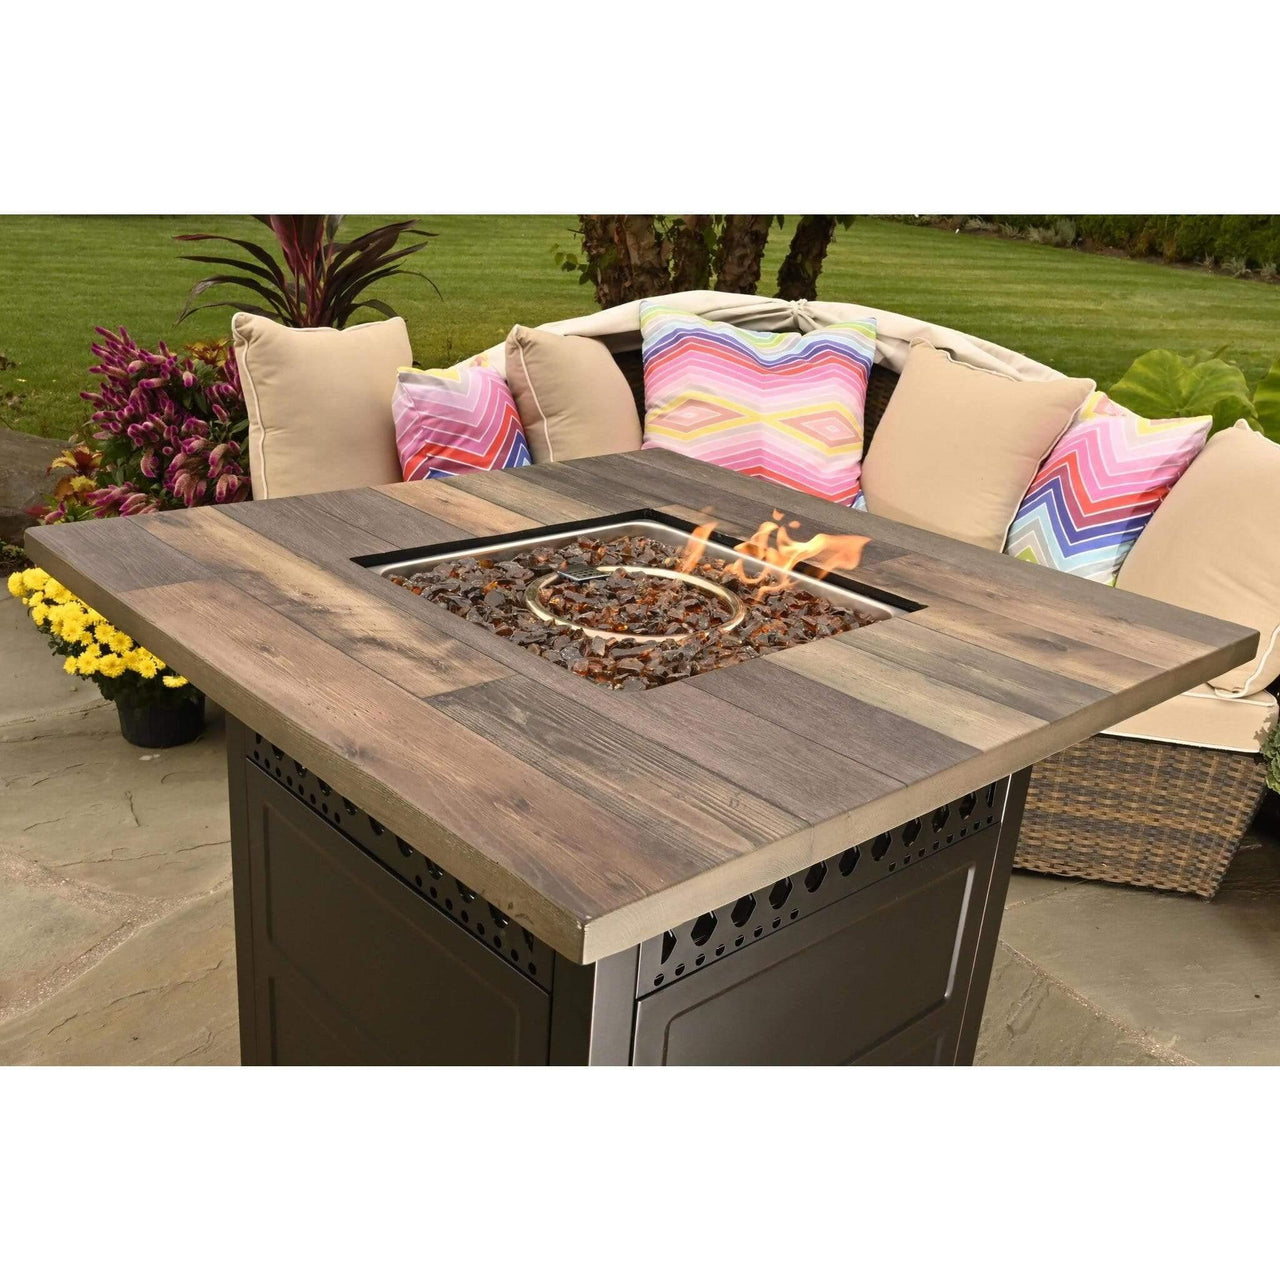 Endless Summer The Harris Dual Heat LP Gas Outdoor Fire Pit/Patio Heater with Wood Look Resin Mantel - GAD19103ES - Fire Pit Stock